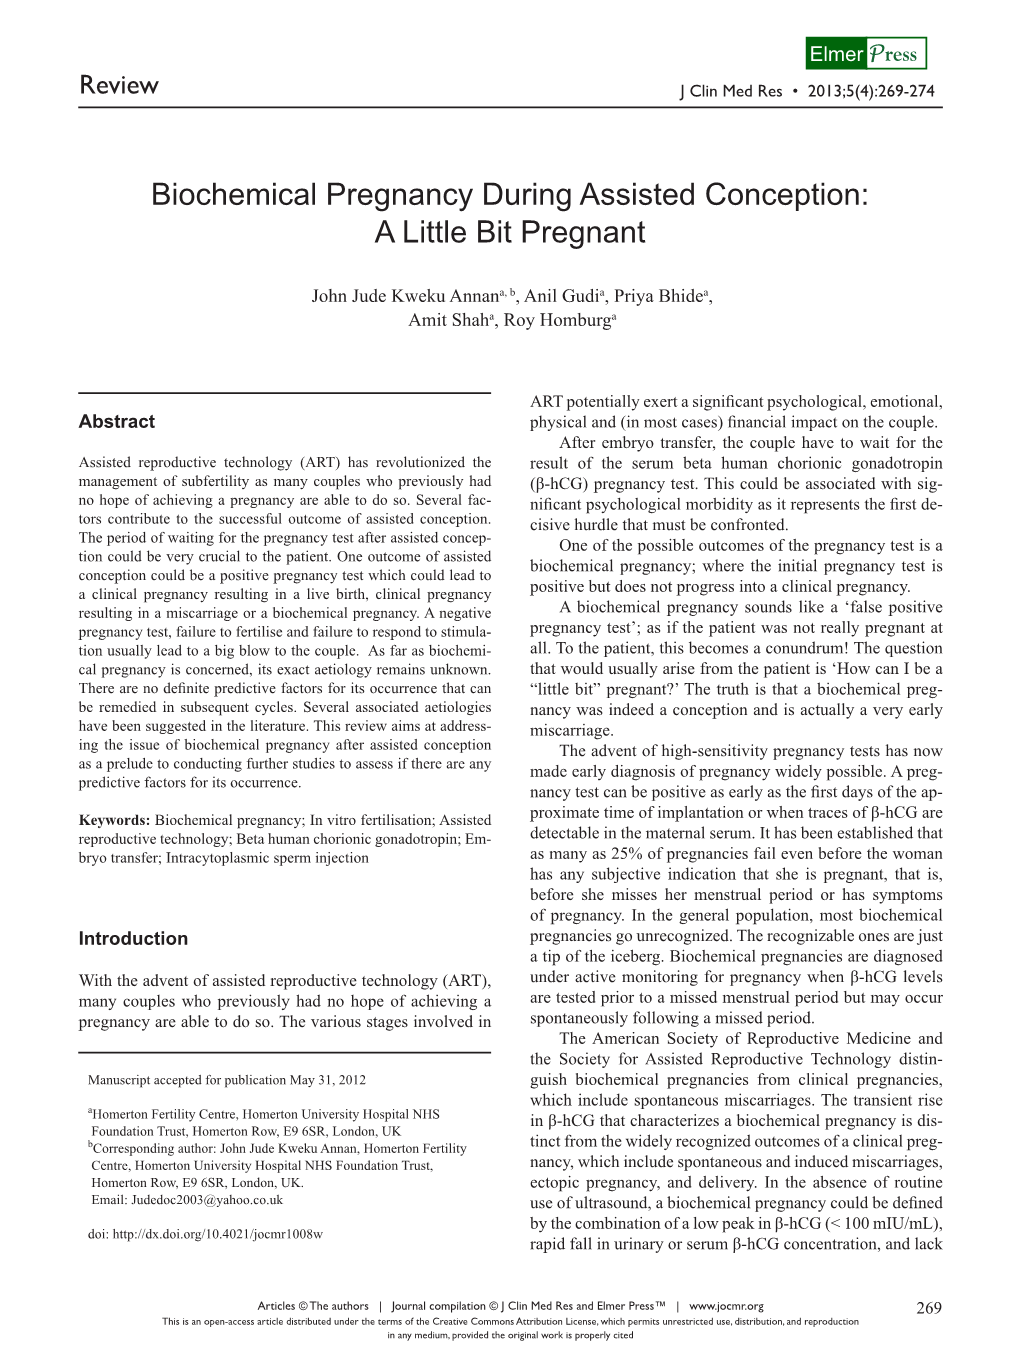 Biochemical Pregnancy During Assisted Conception: a Little Bit Pregnant